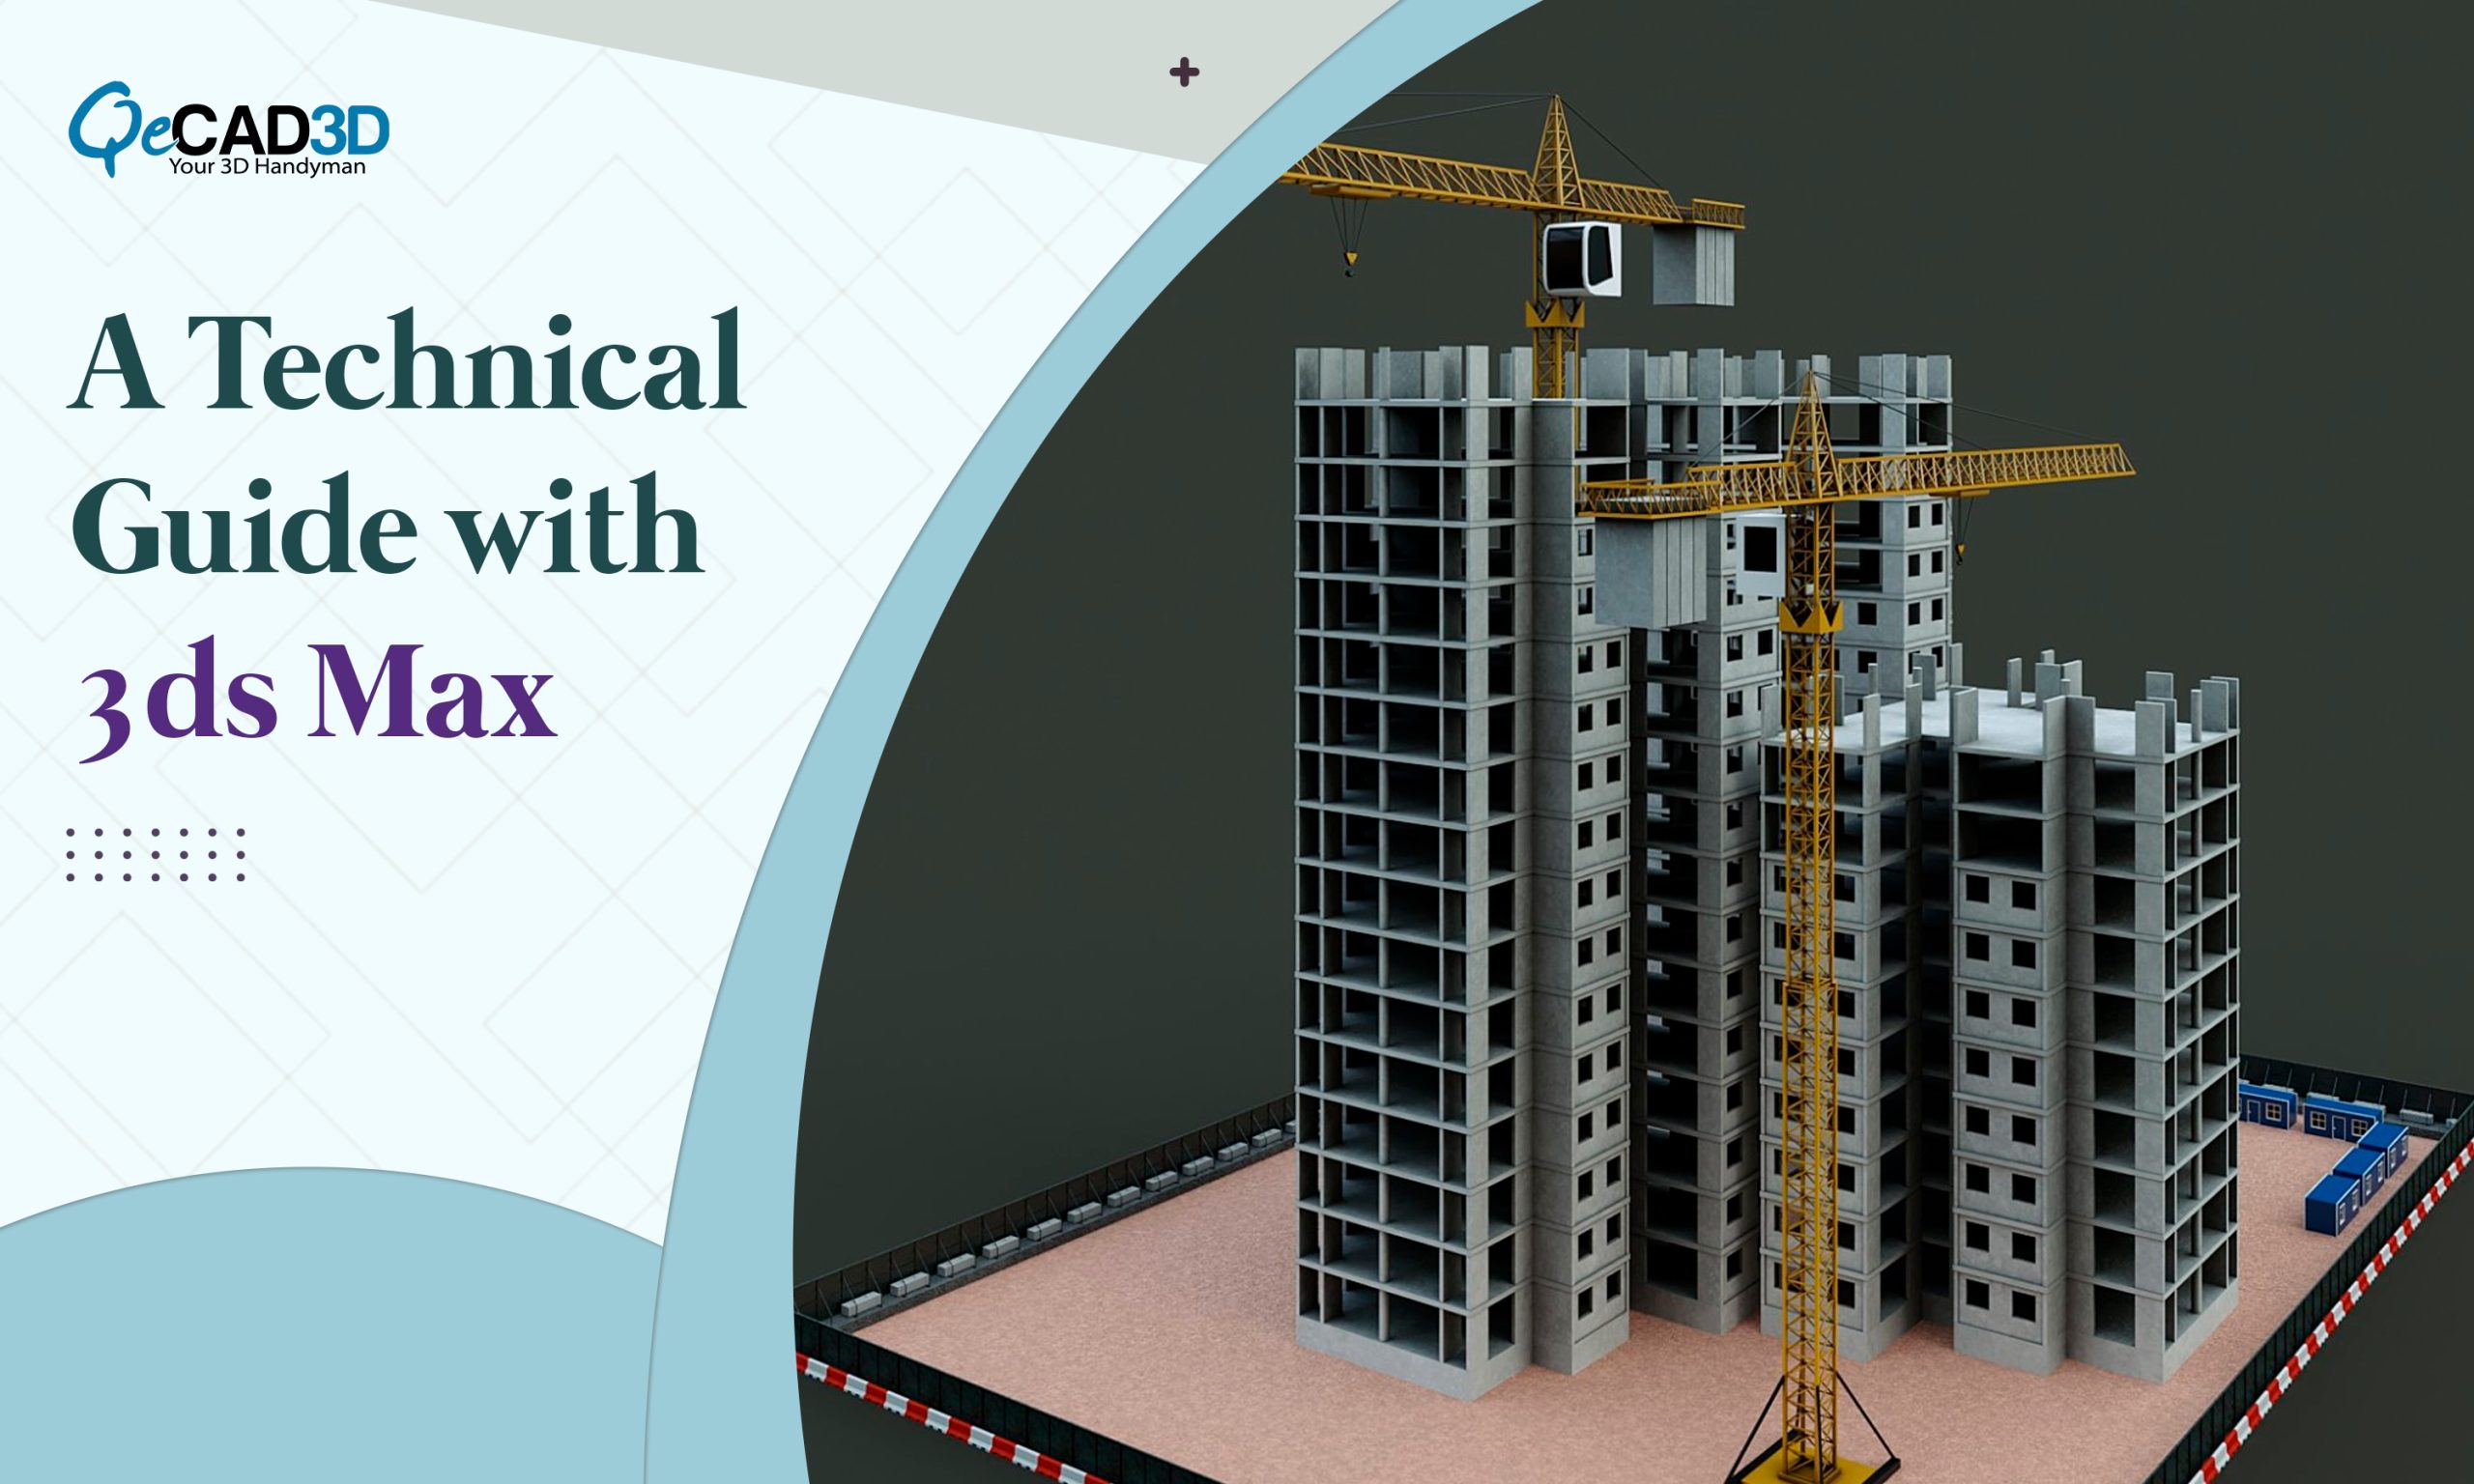 A Technical Guide with 3ds Max